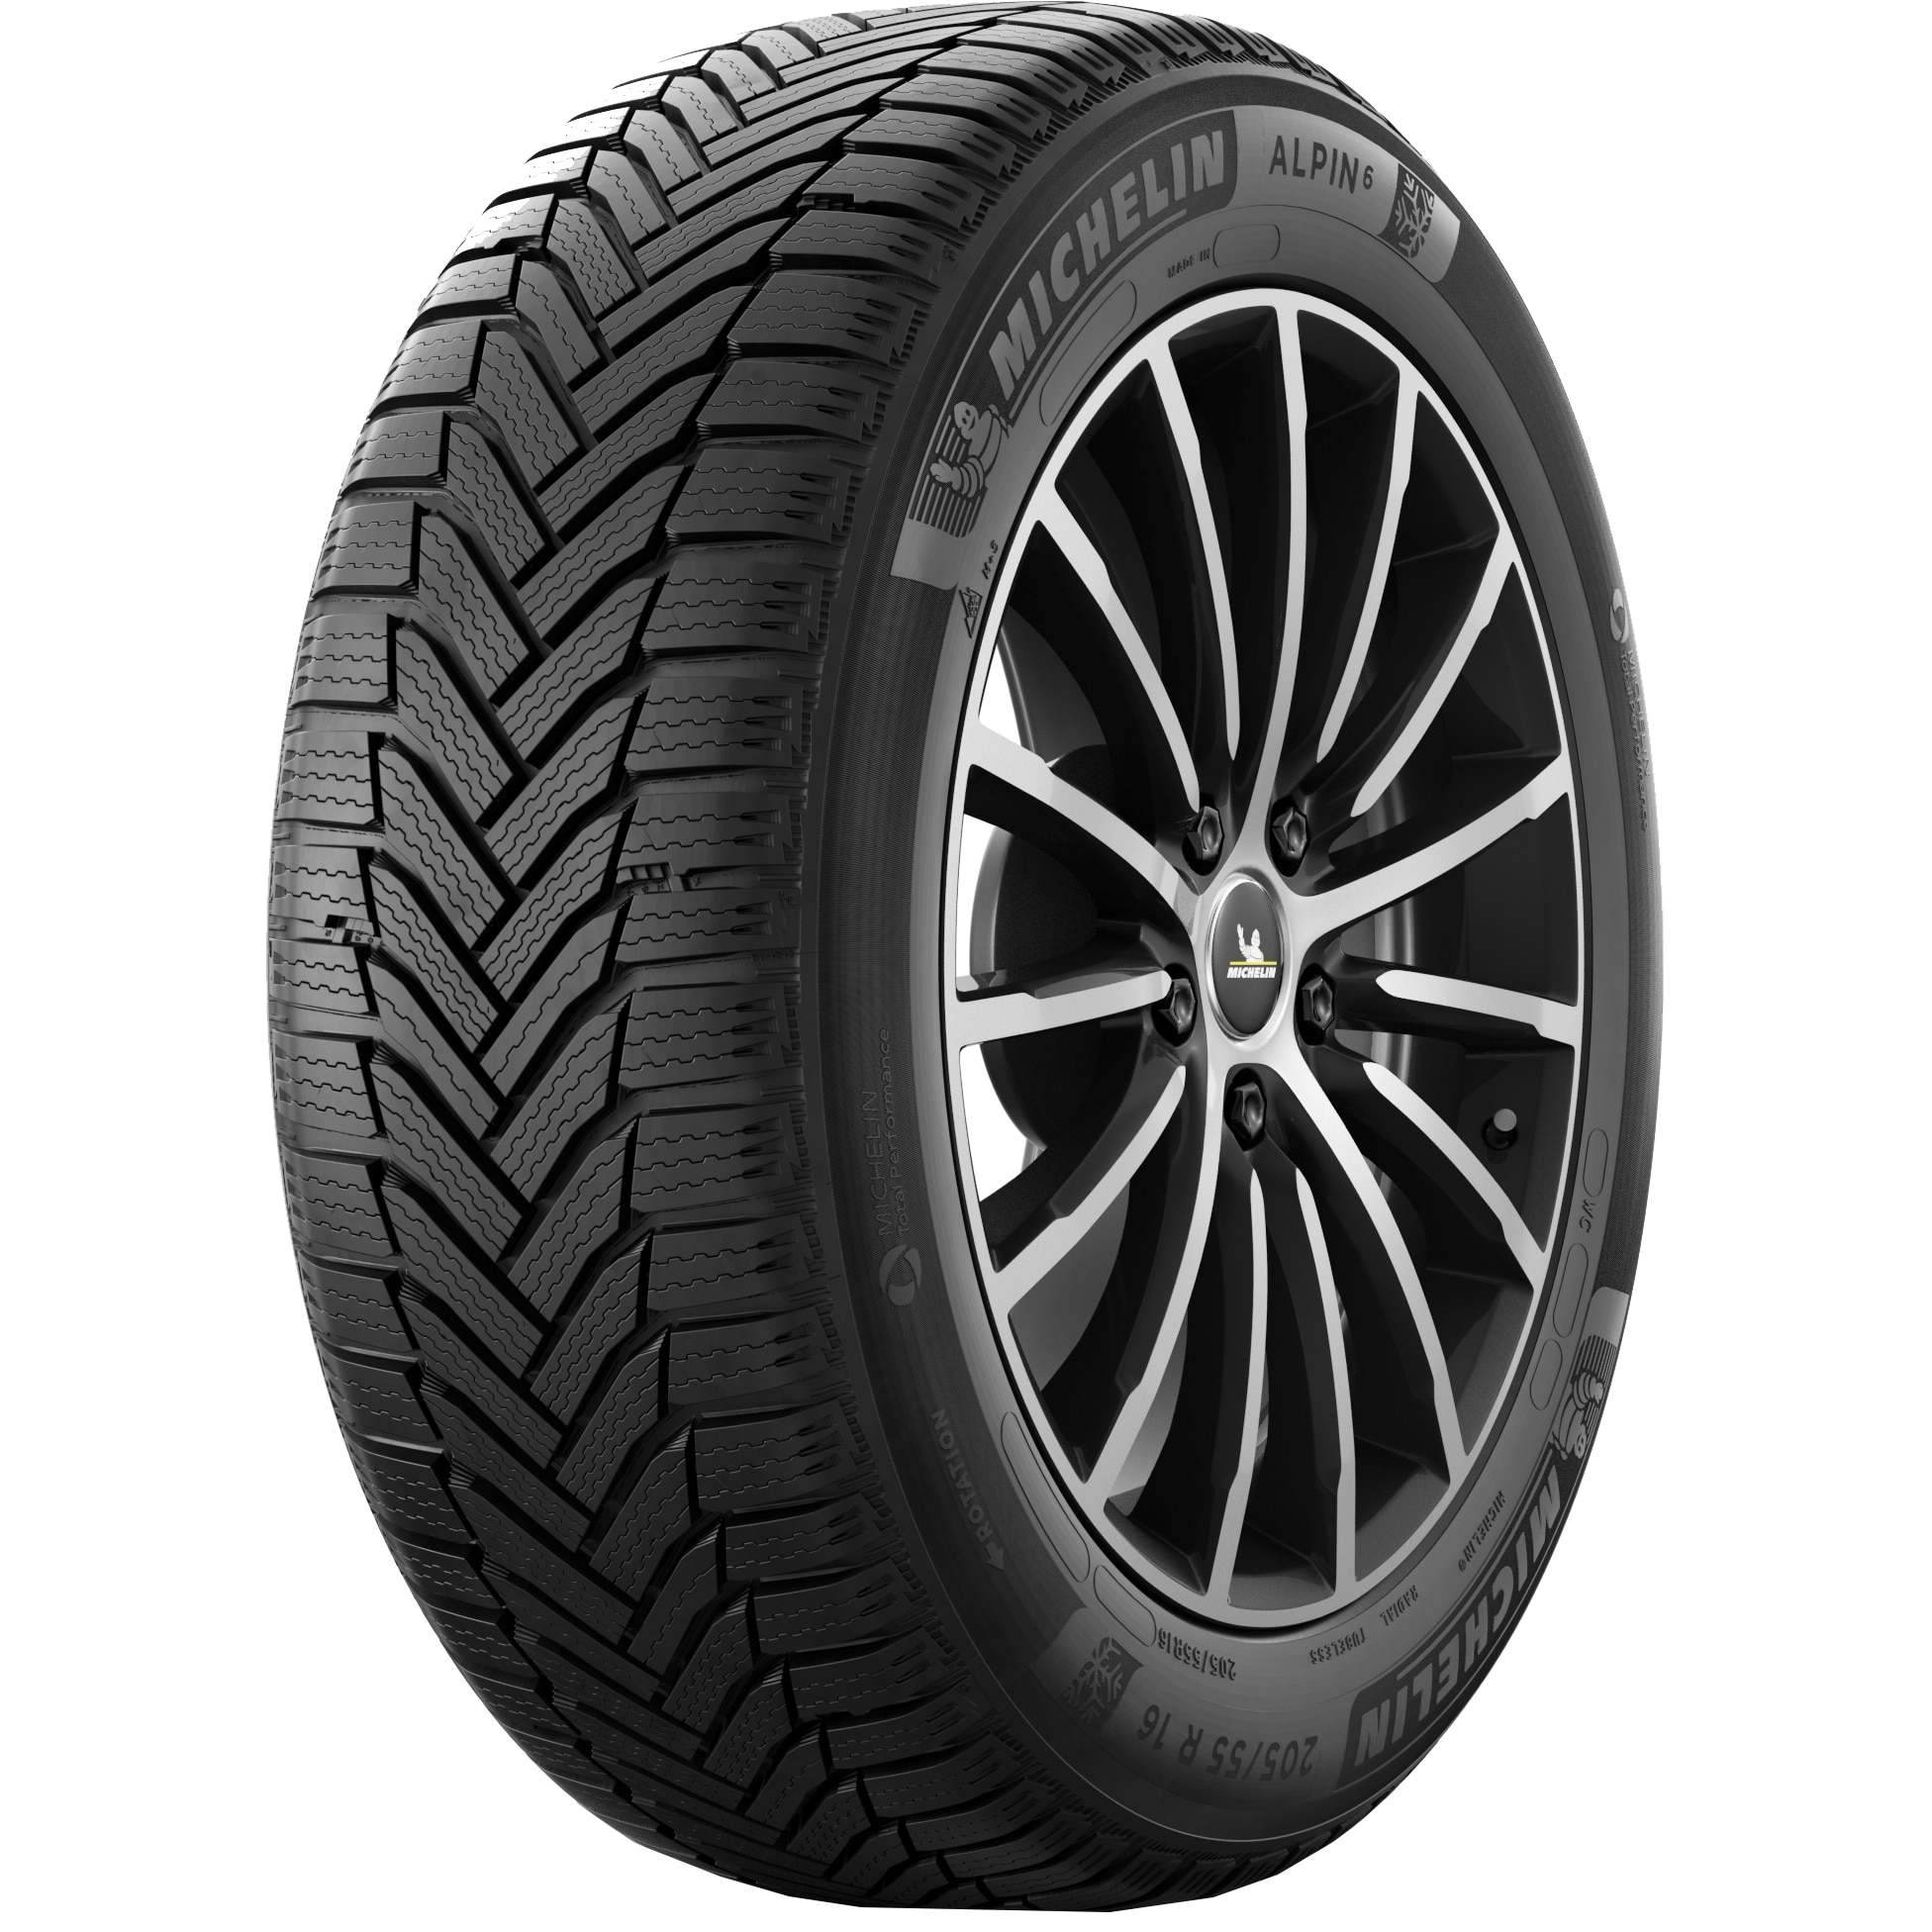 Unmanned snorkel thirst Anvelopa de iarna Michelin ALPIN 6 205/55R16 91T - eMAG.ro